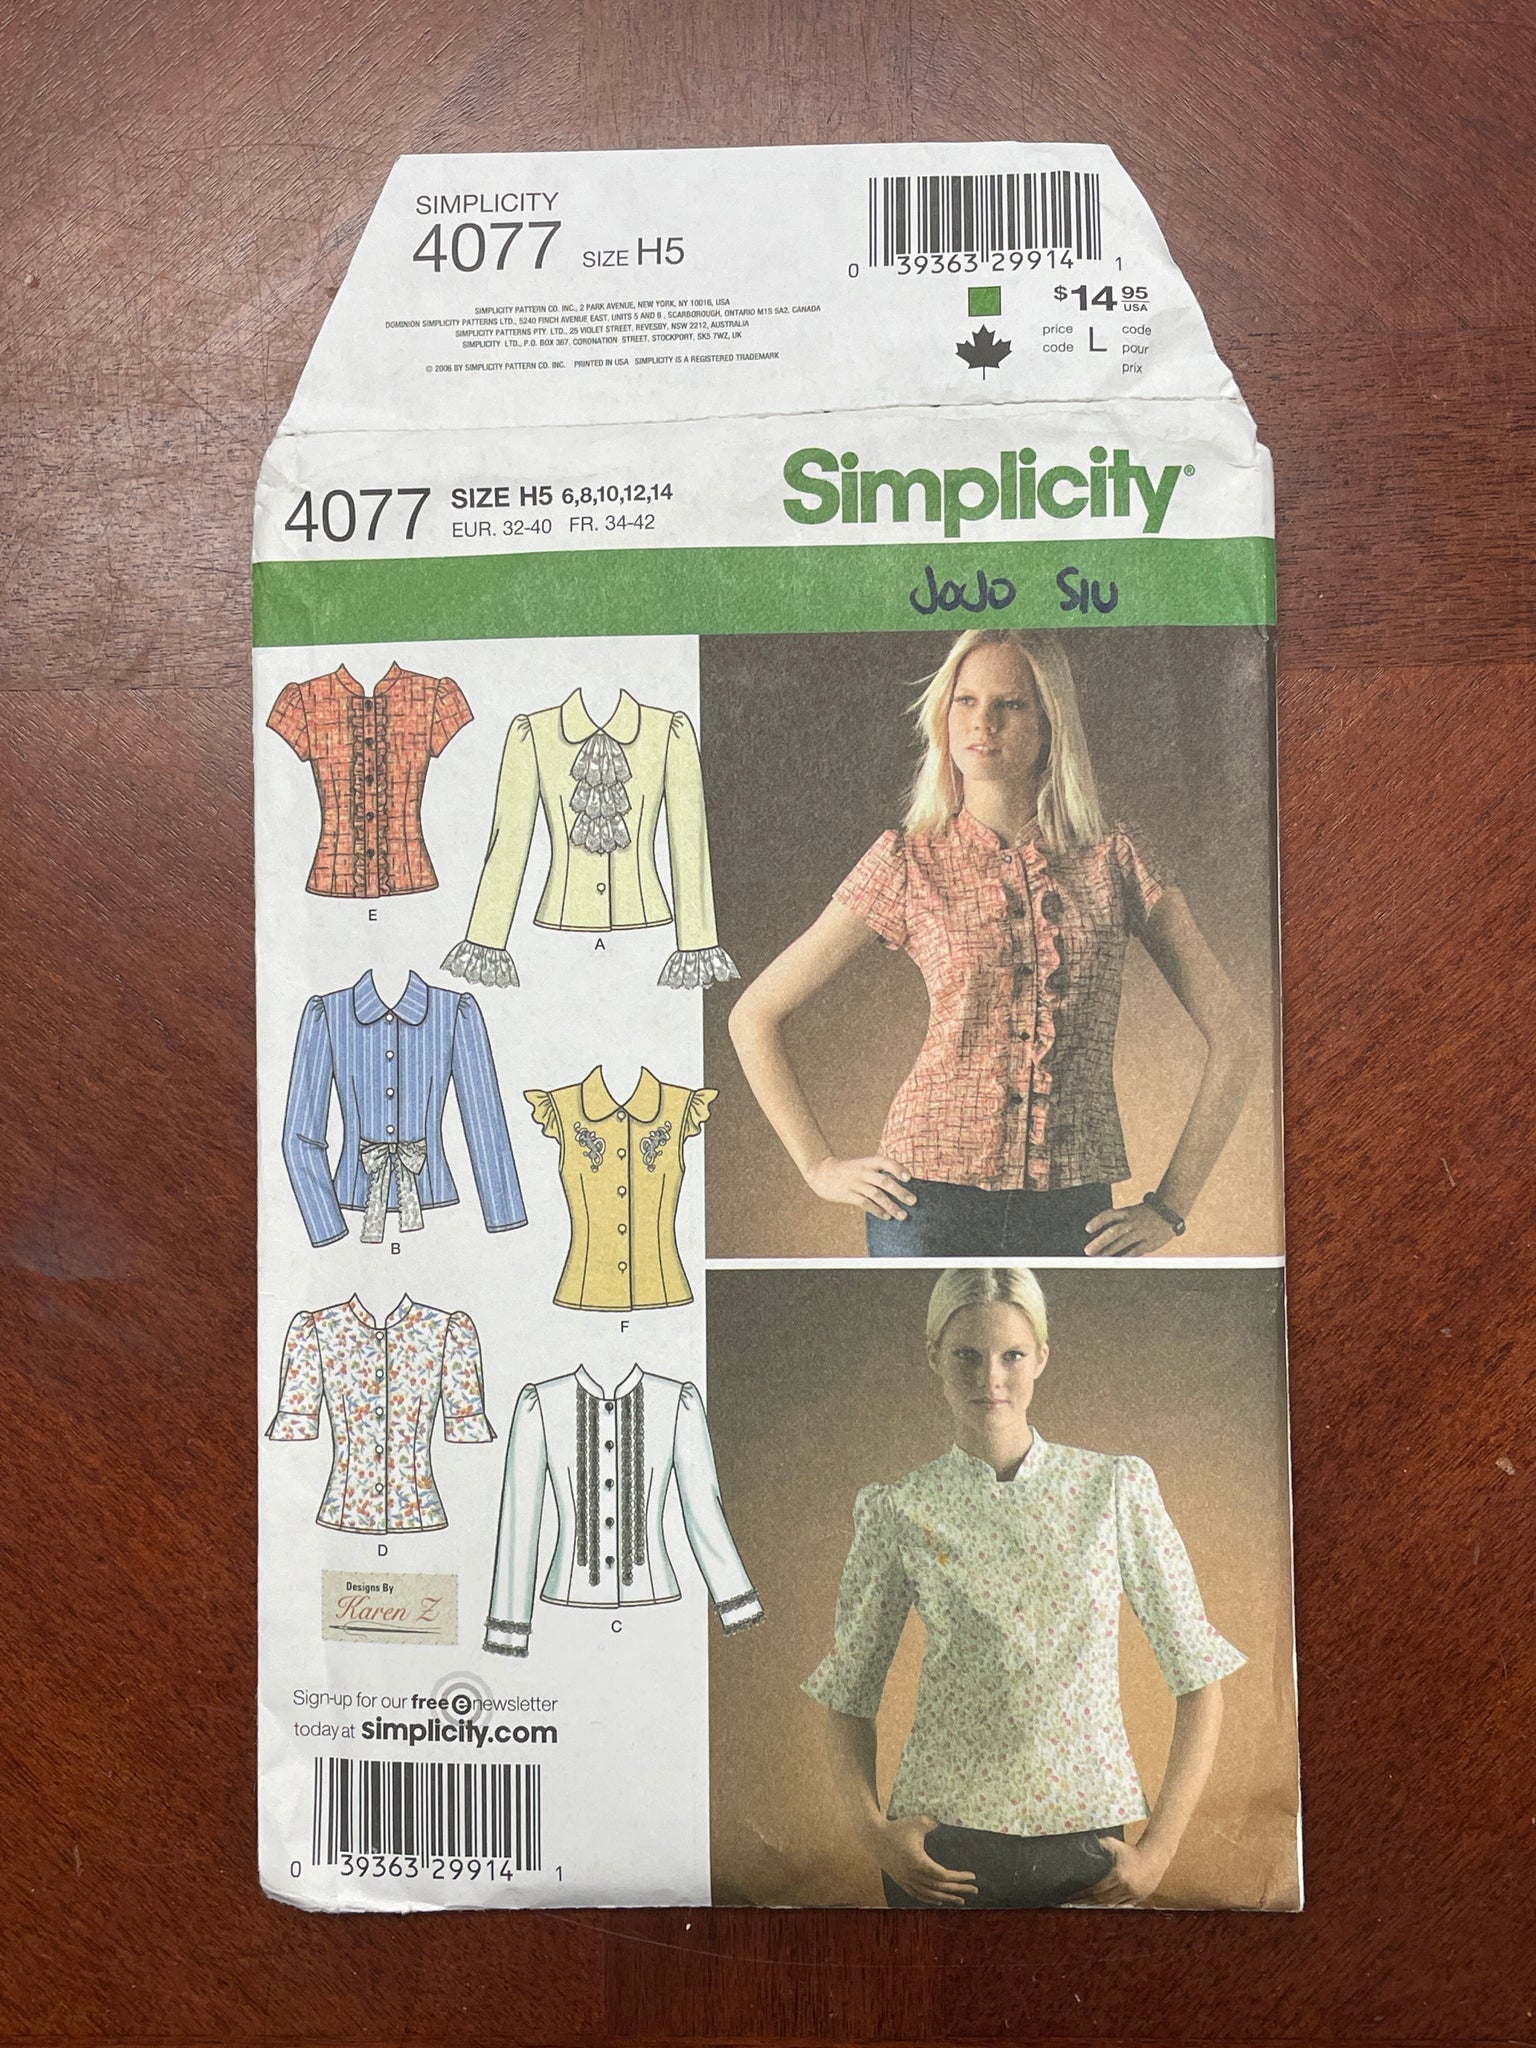 2006 Simplicity 4077 Pattern - Blouses FACTORY FOLDED